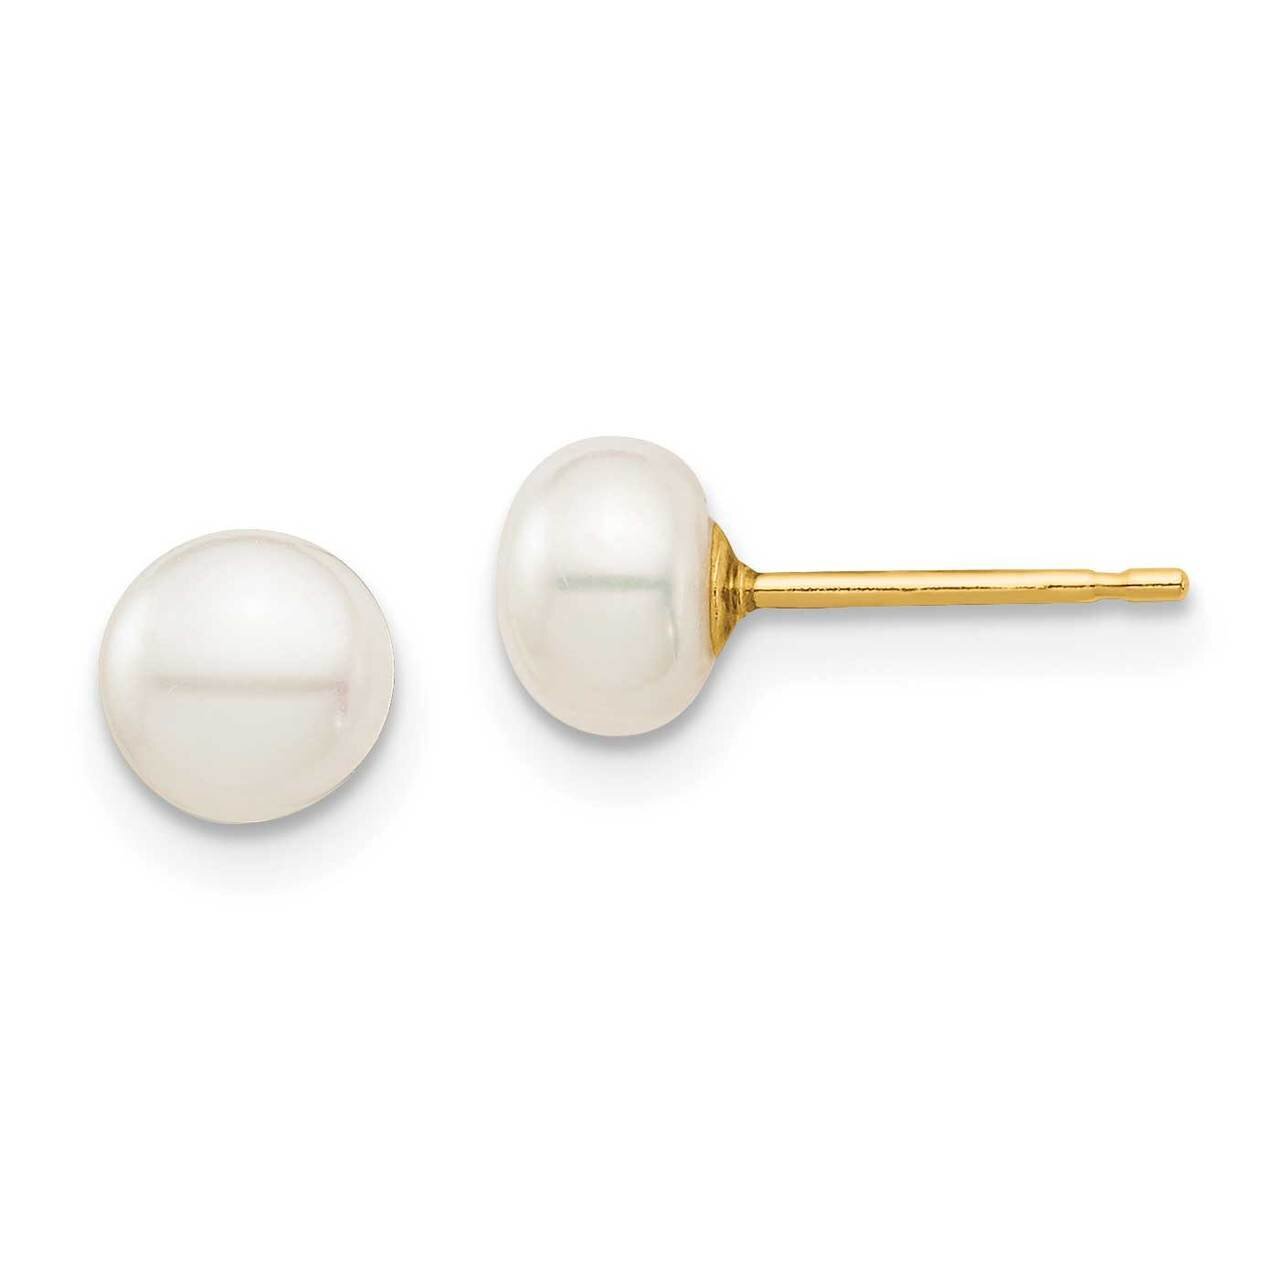 5-6mm White Button Freshwater Cultured Pearl Stud Post Earrings 14k Gold SE2938